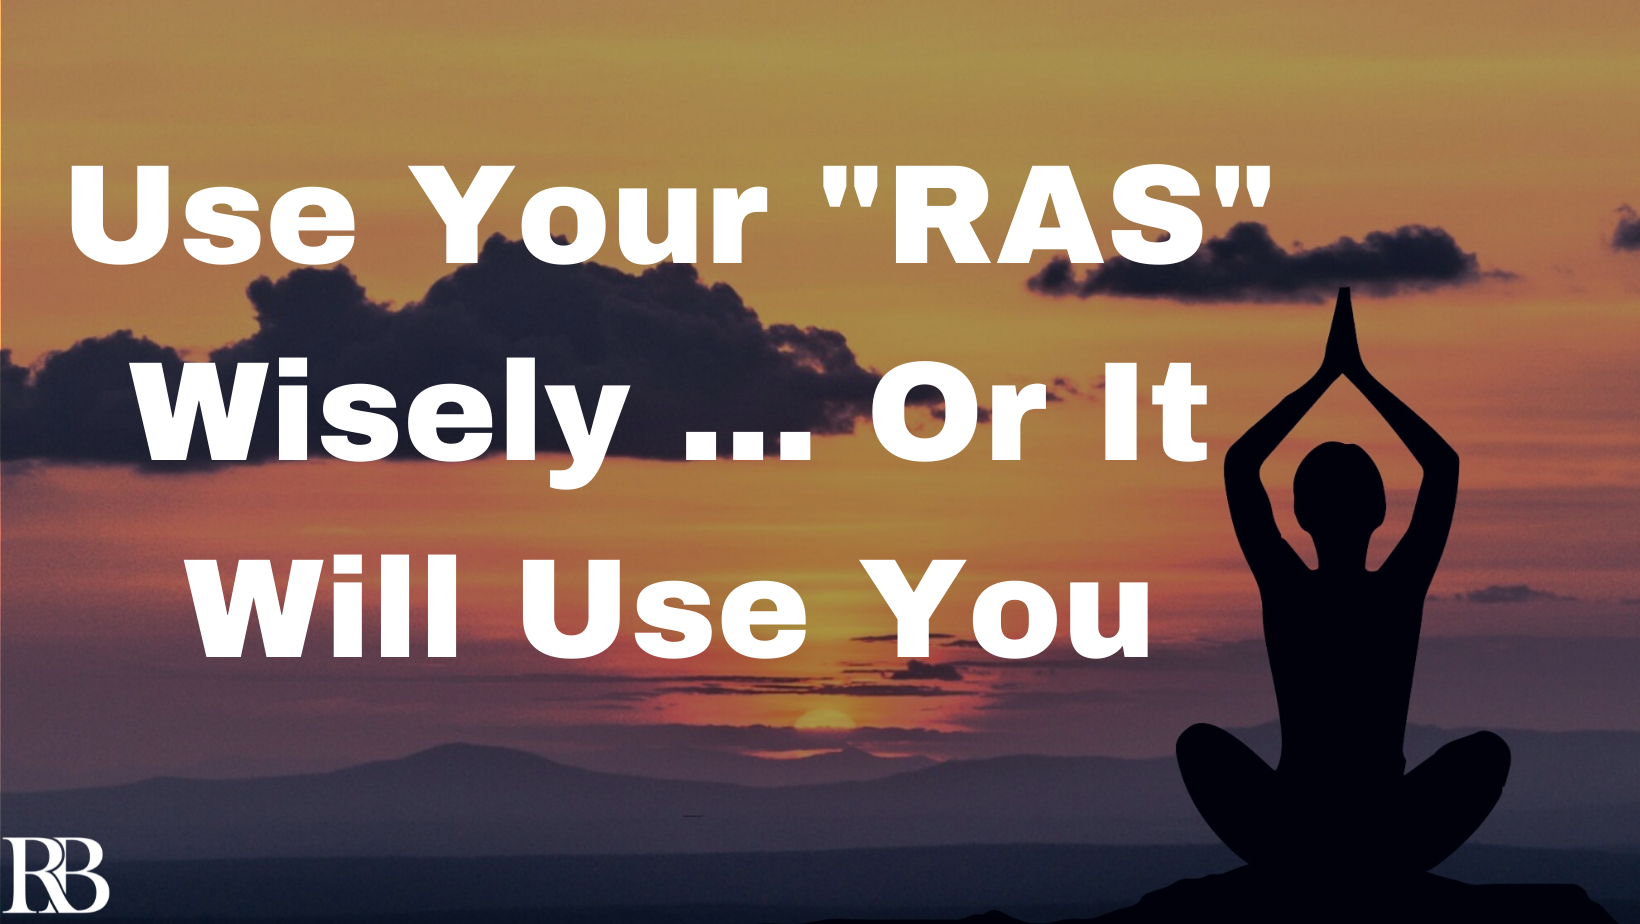 Use Your "RAS" Wisely … Or It Will Use You